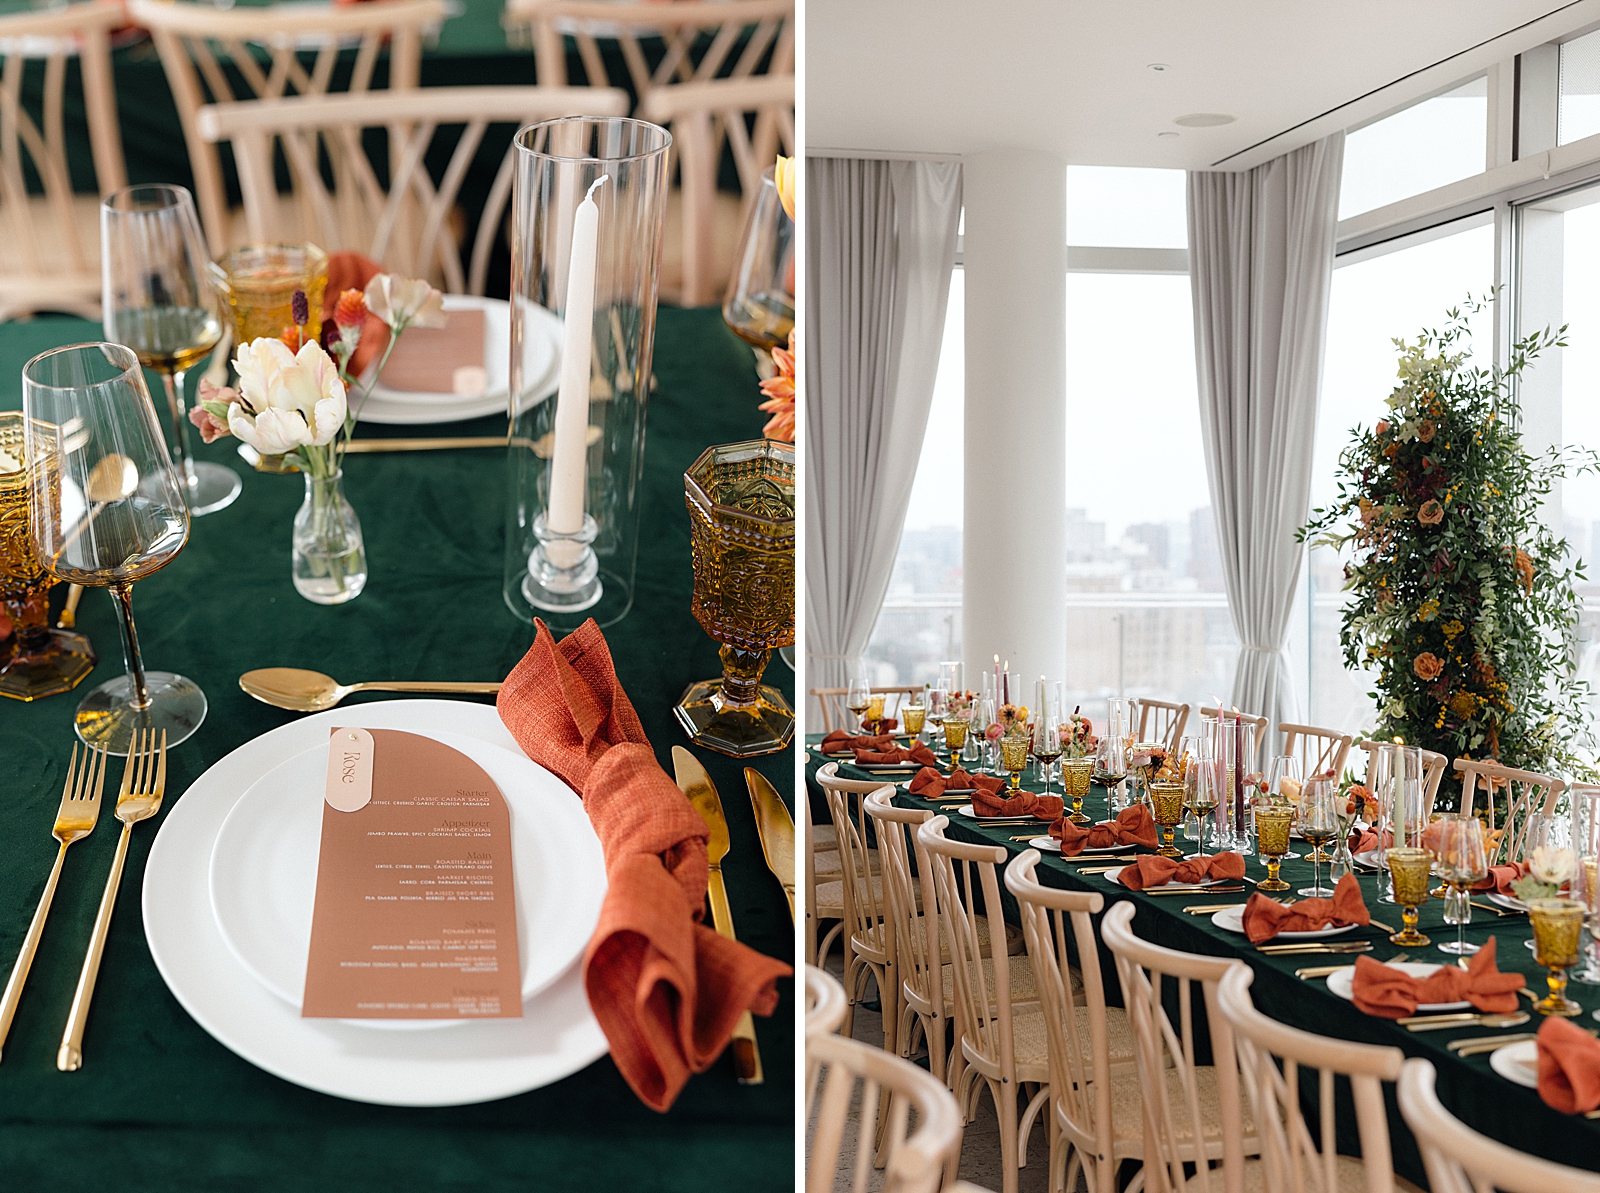 Left photo: Up close shot of a place setting on a reception table, including a menu and place card. 
Right photo: Shot of one of the fully set reception tables decked out in fall tones. 